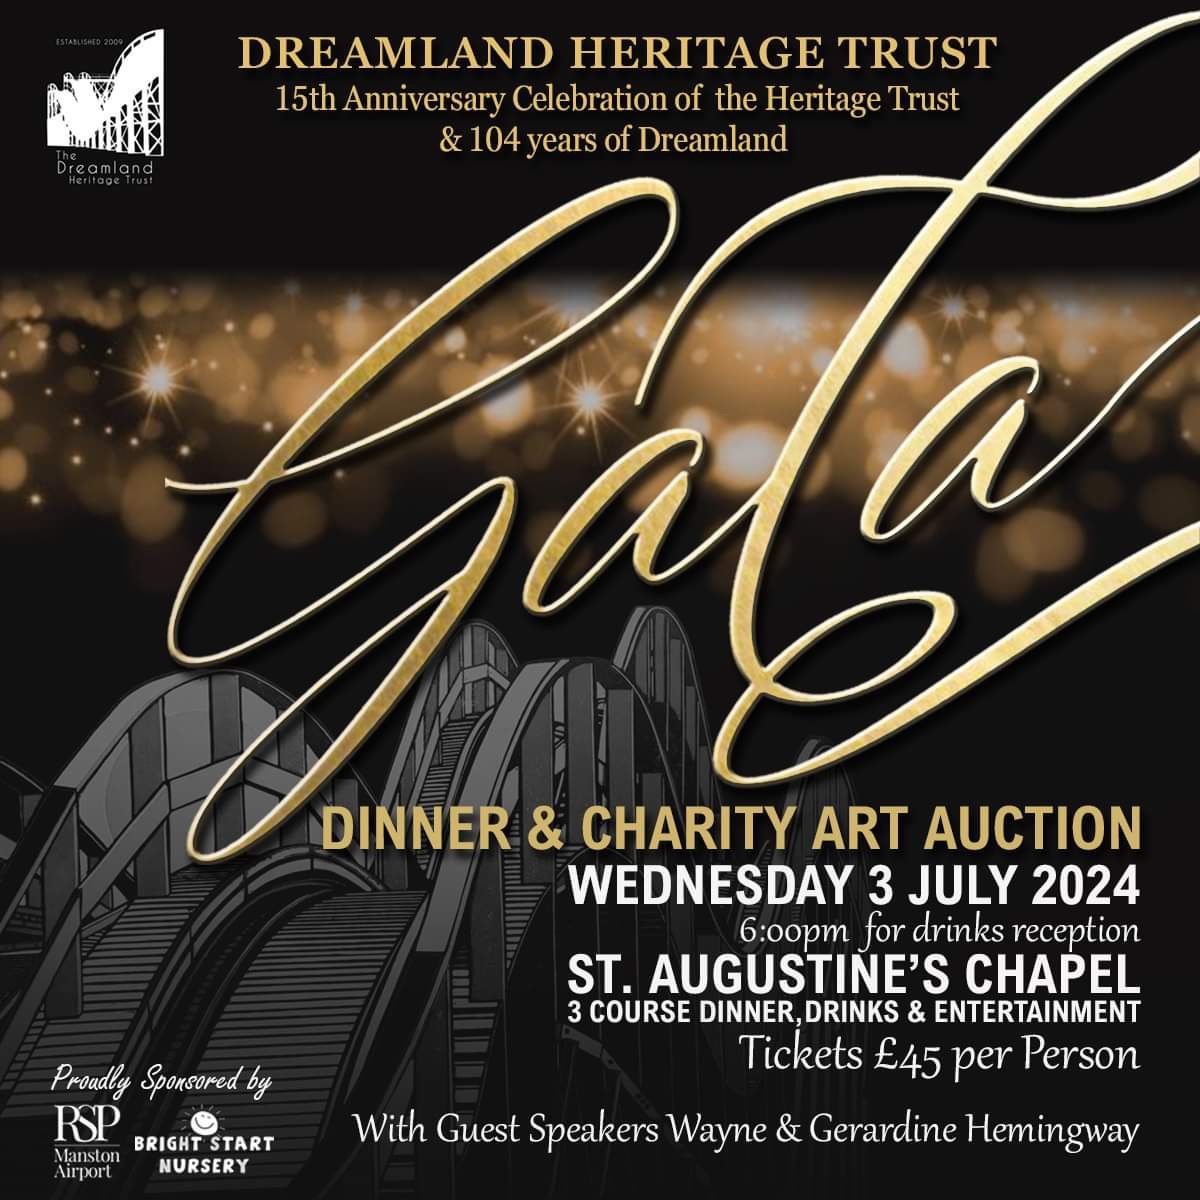 Gala Dinner & Charity Art Auction Celebrating 15 years of Dreamland Heritage Trust 